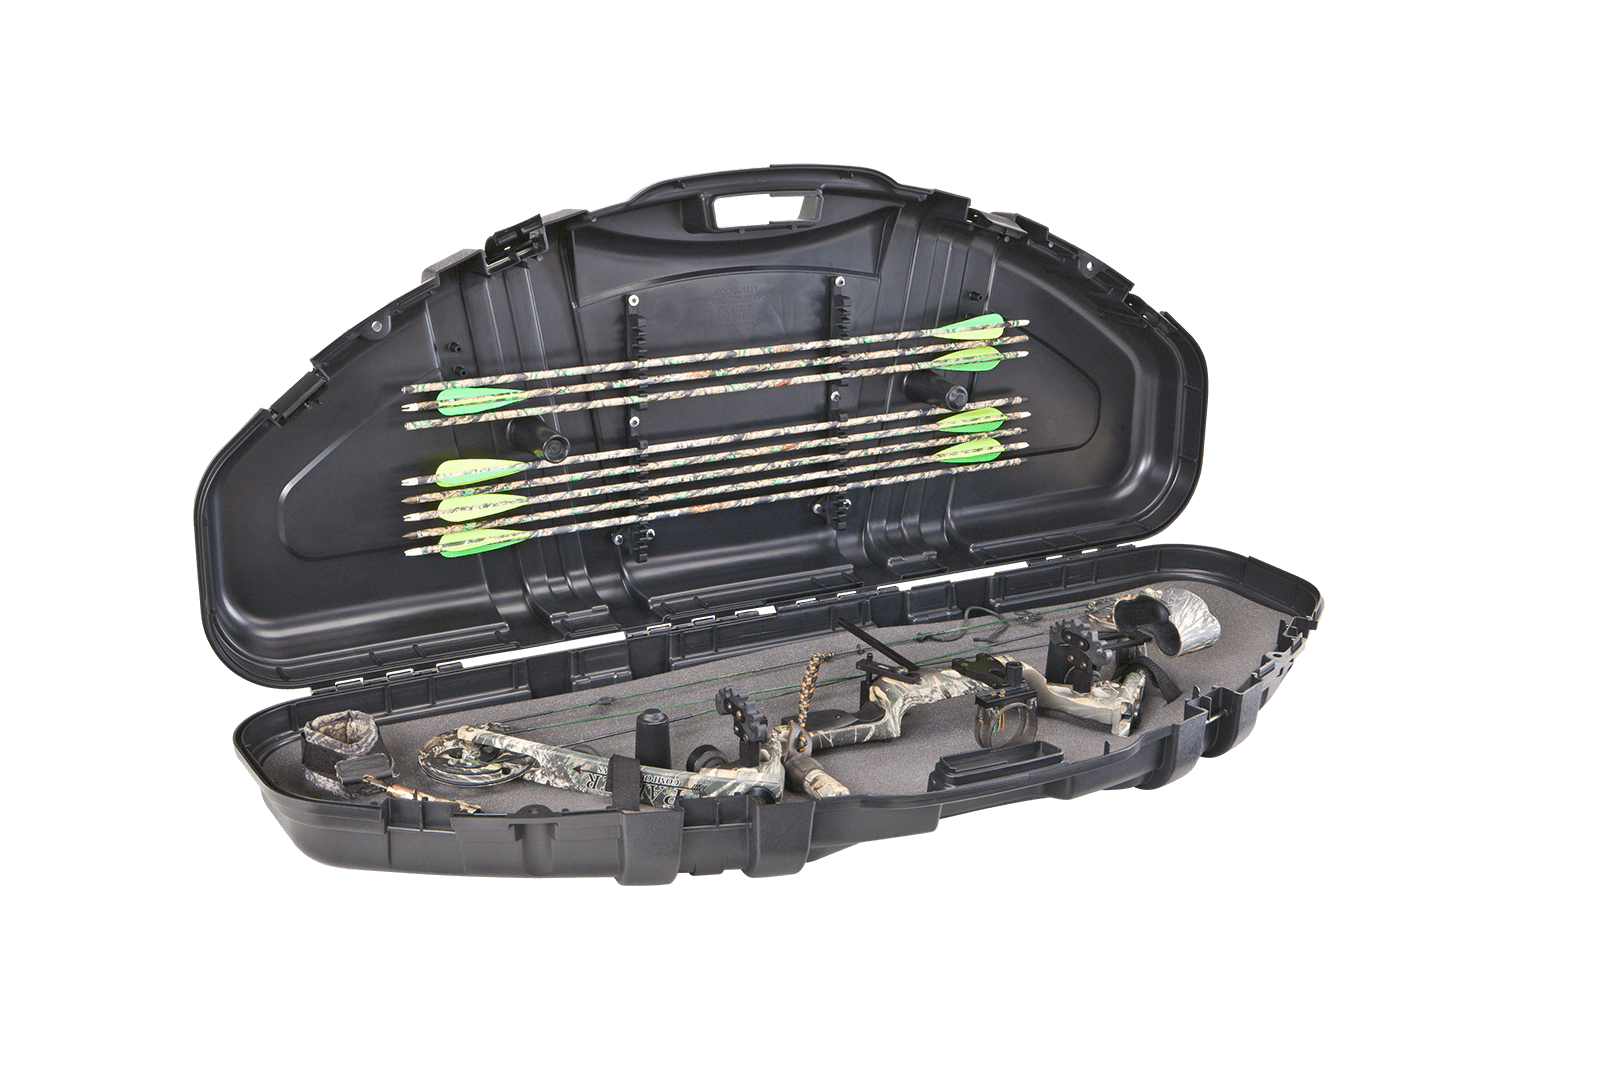 NEW Plano Protector 1110 Compact Bow Hard Case Compound Arrow Archery Storage 